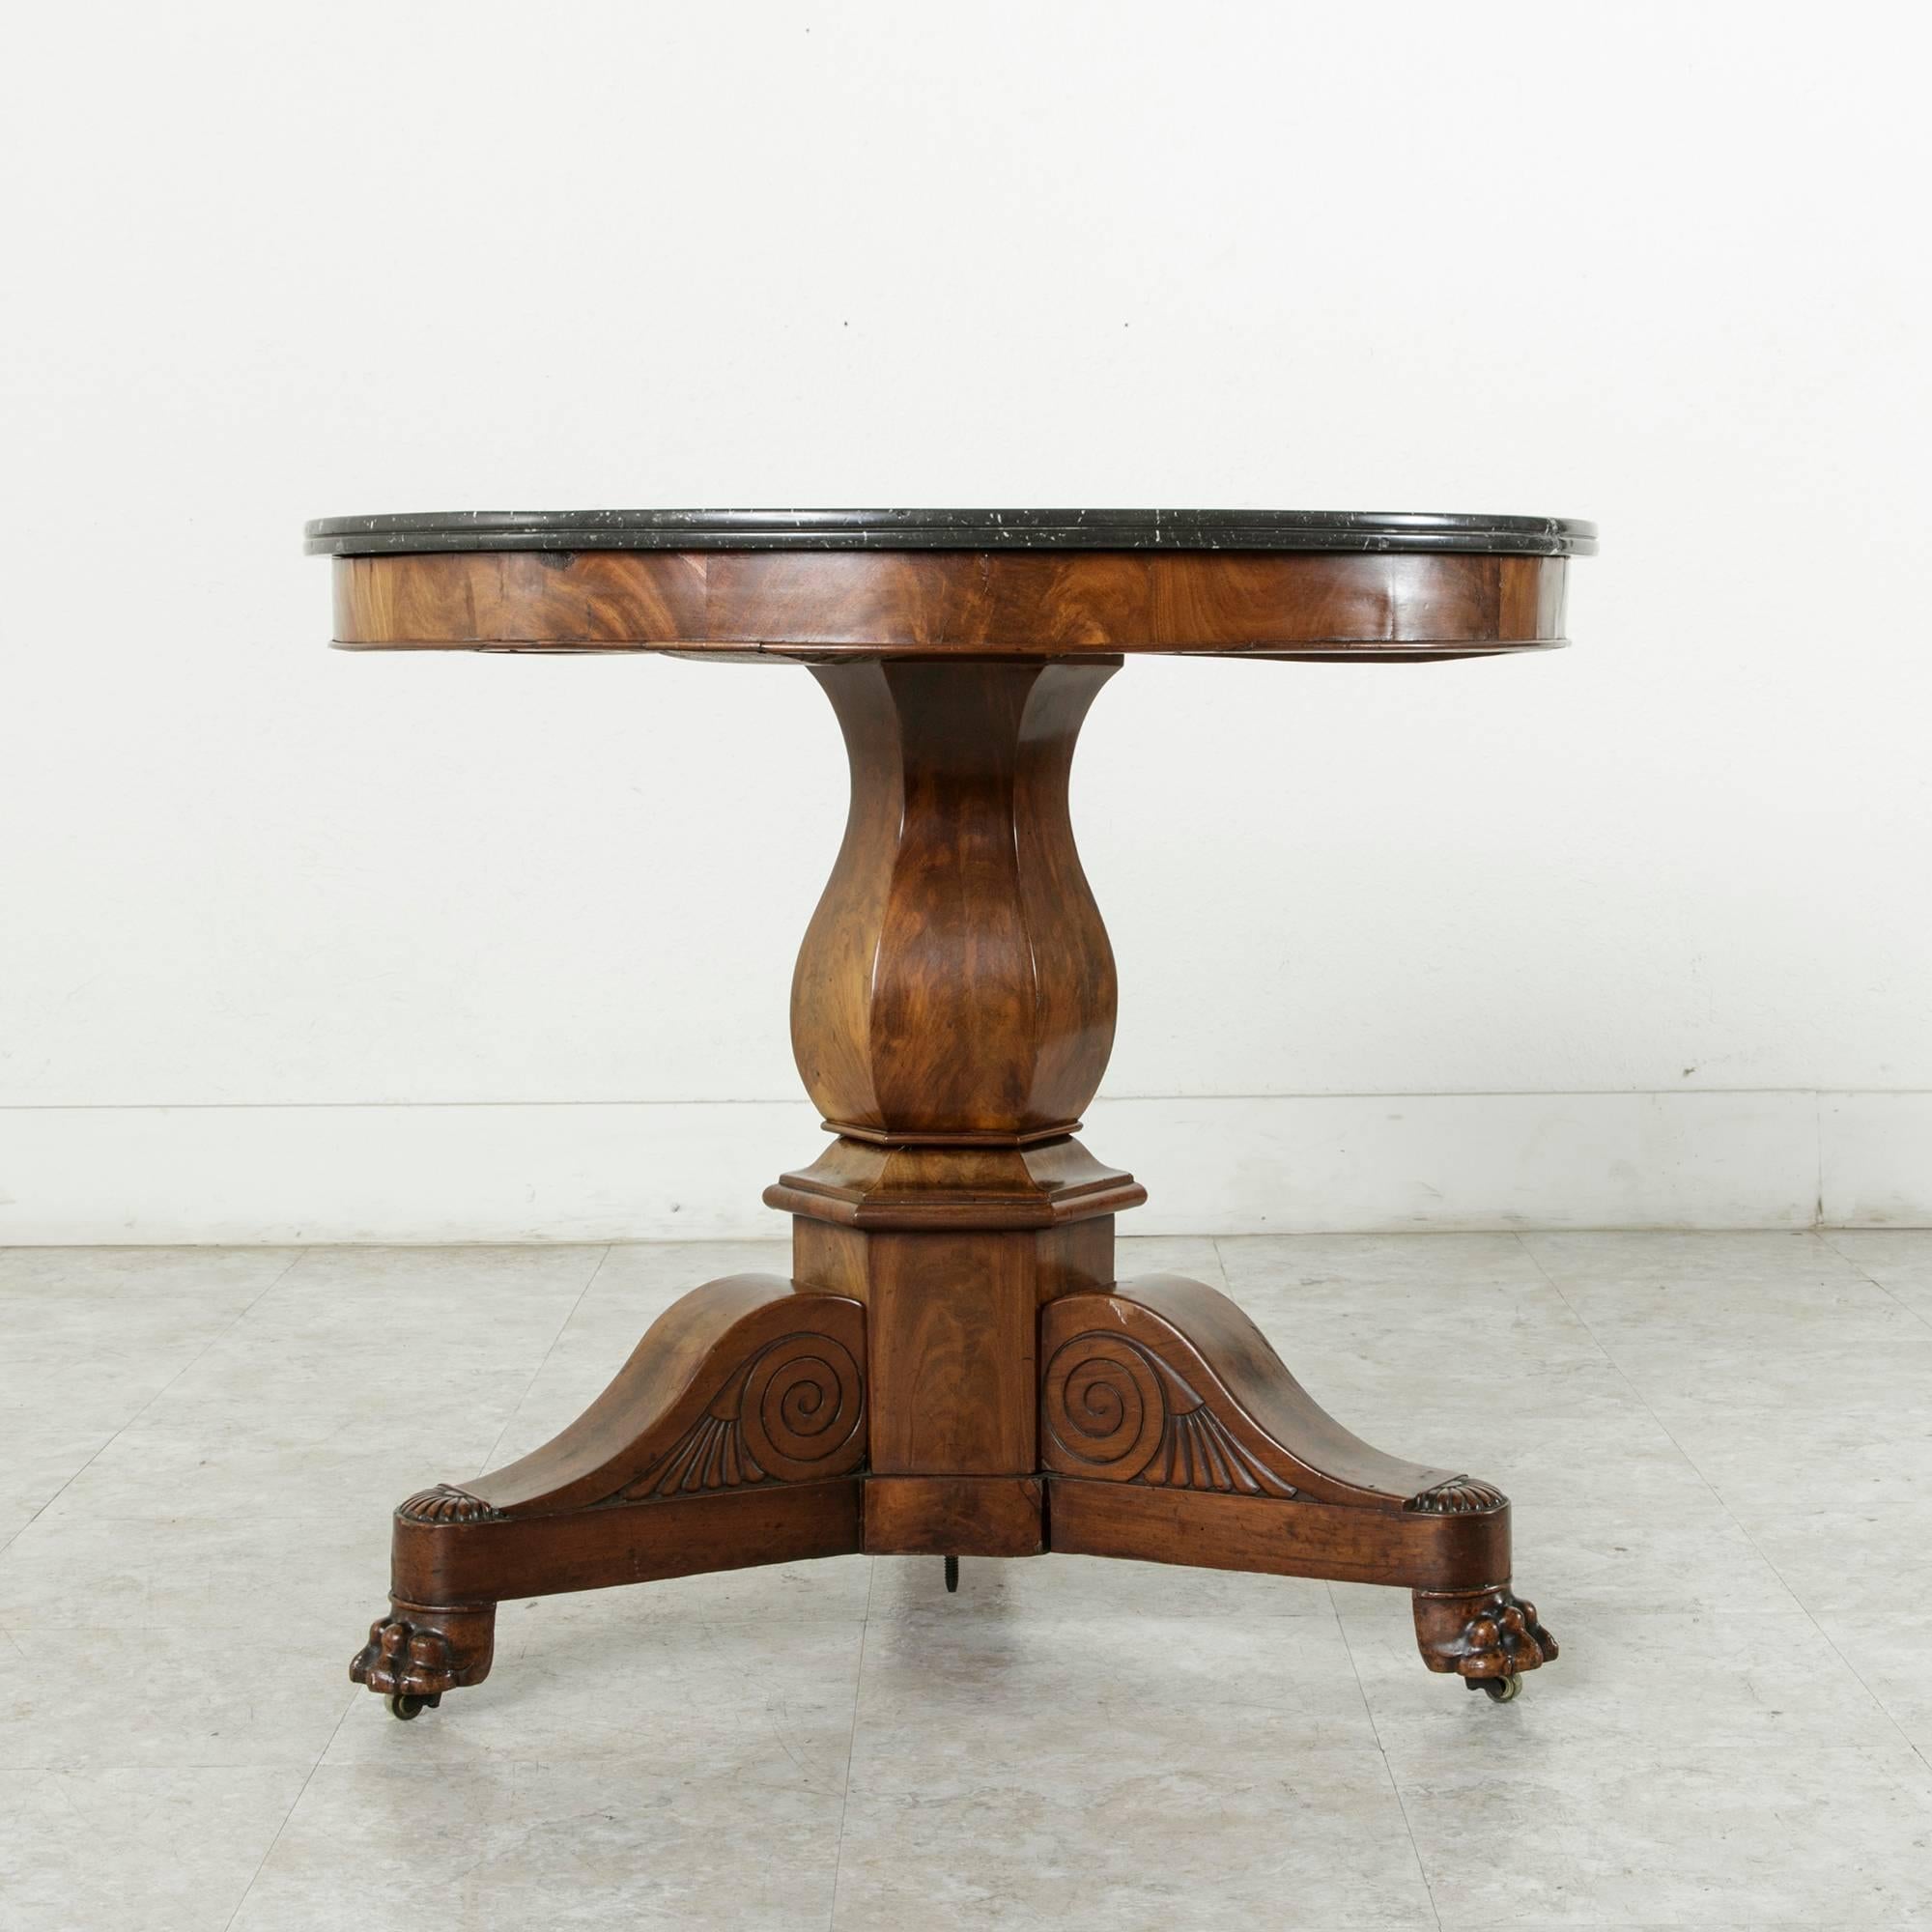 19th Century French Restauration Period Mahogany Gueridon or Pedestal Table 1